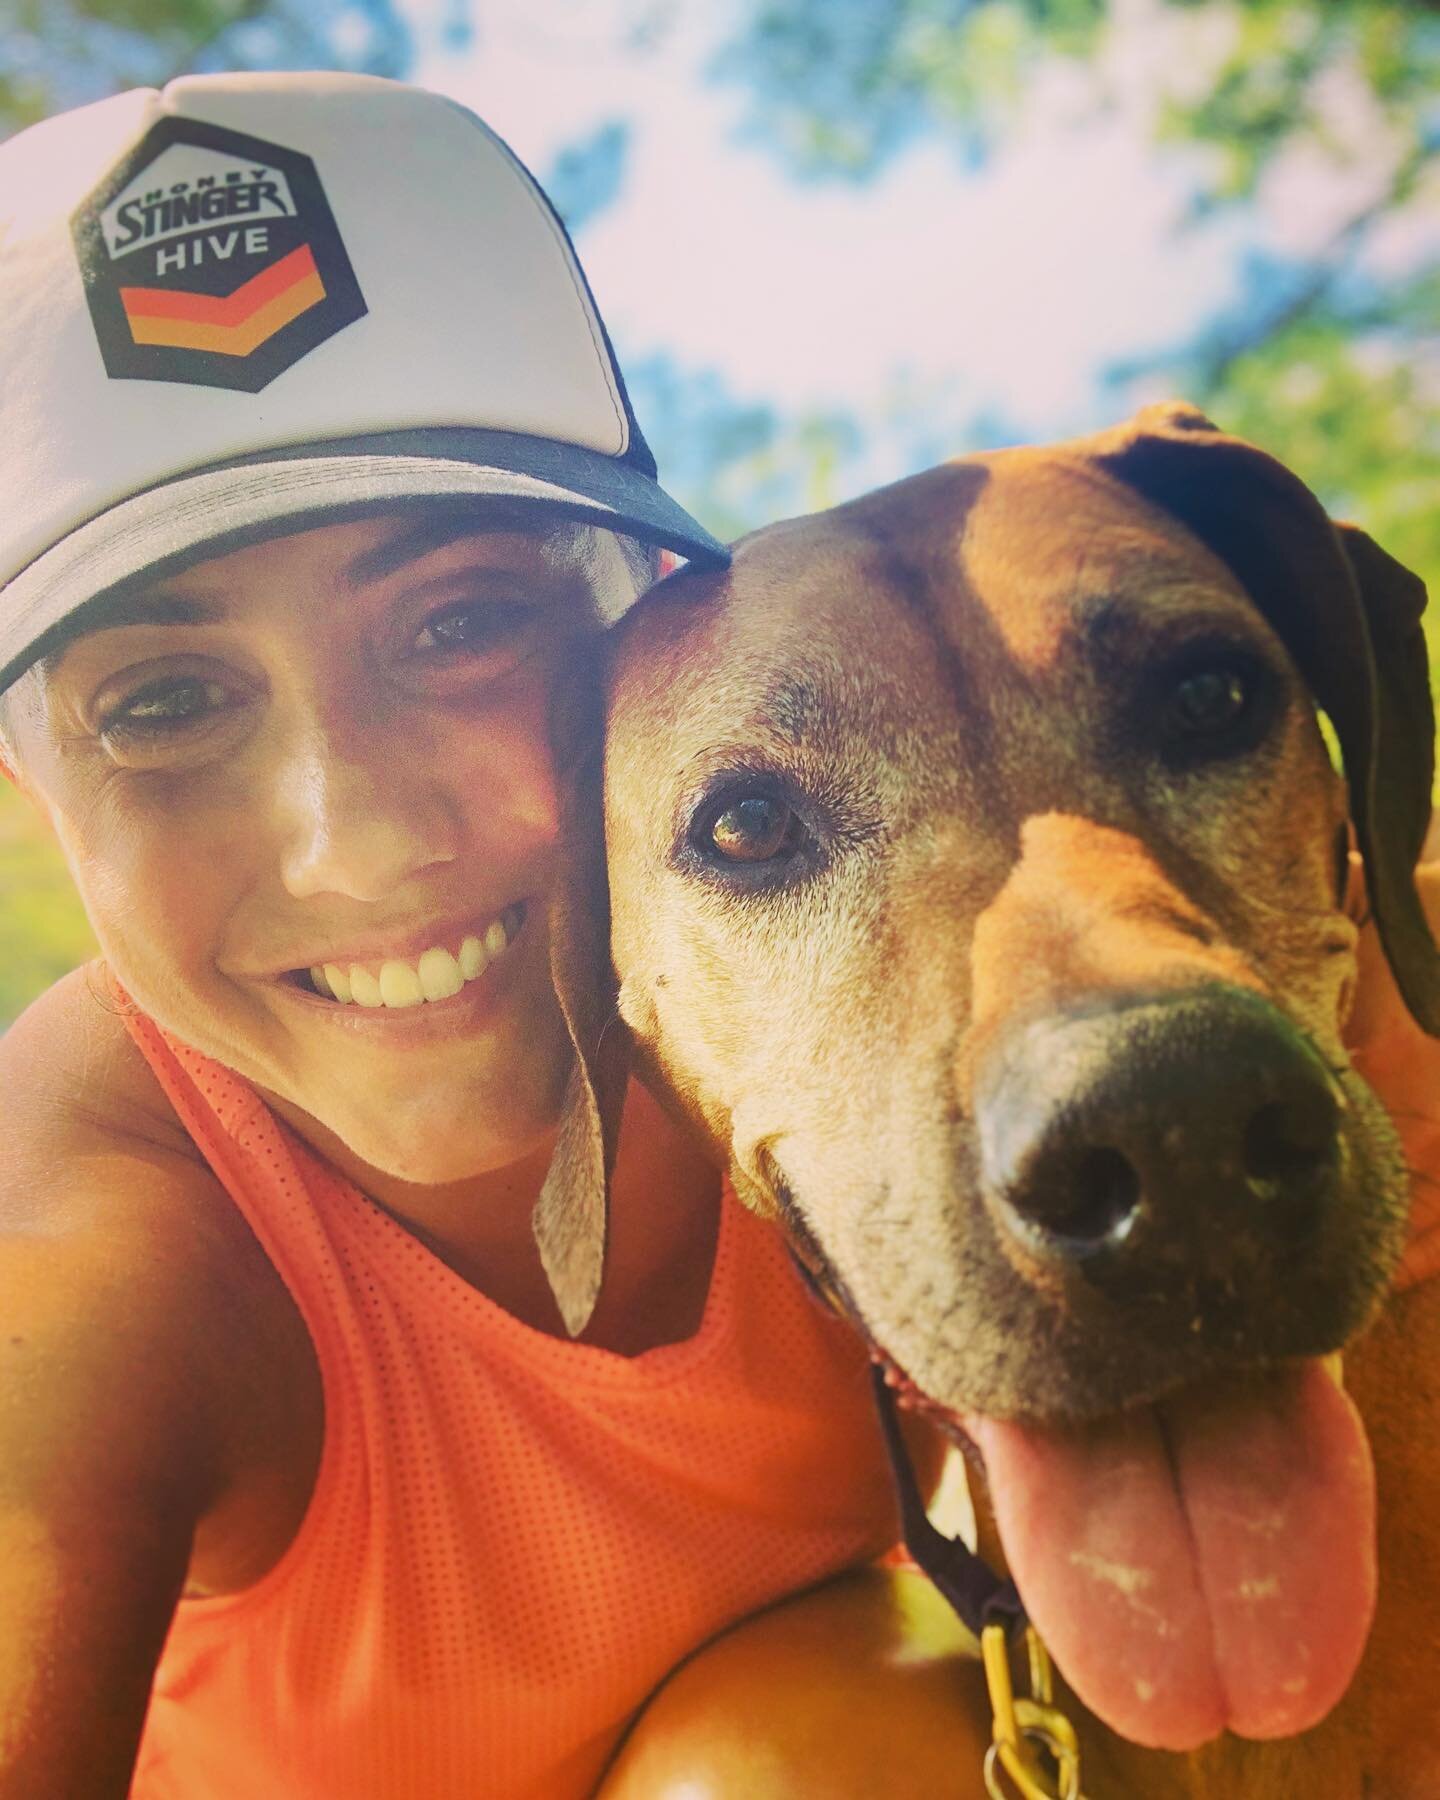 Morning beach miles with my 4 legged running buddy. Perfect start to Labor Day. 2 miles on the beach together and then I dropped her off, to run 6 more miles. Shin felt great, with just one quick lightning bolt twinge of pain for a nano second down i